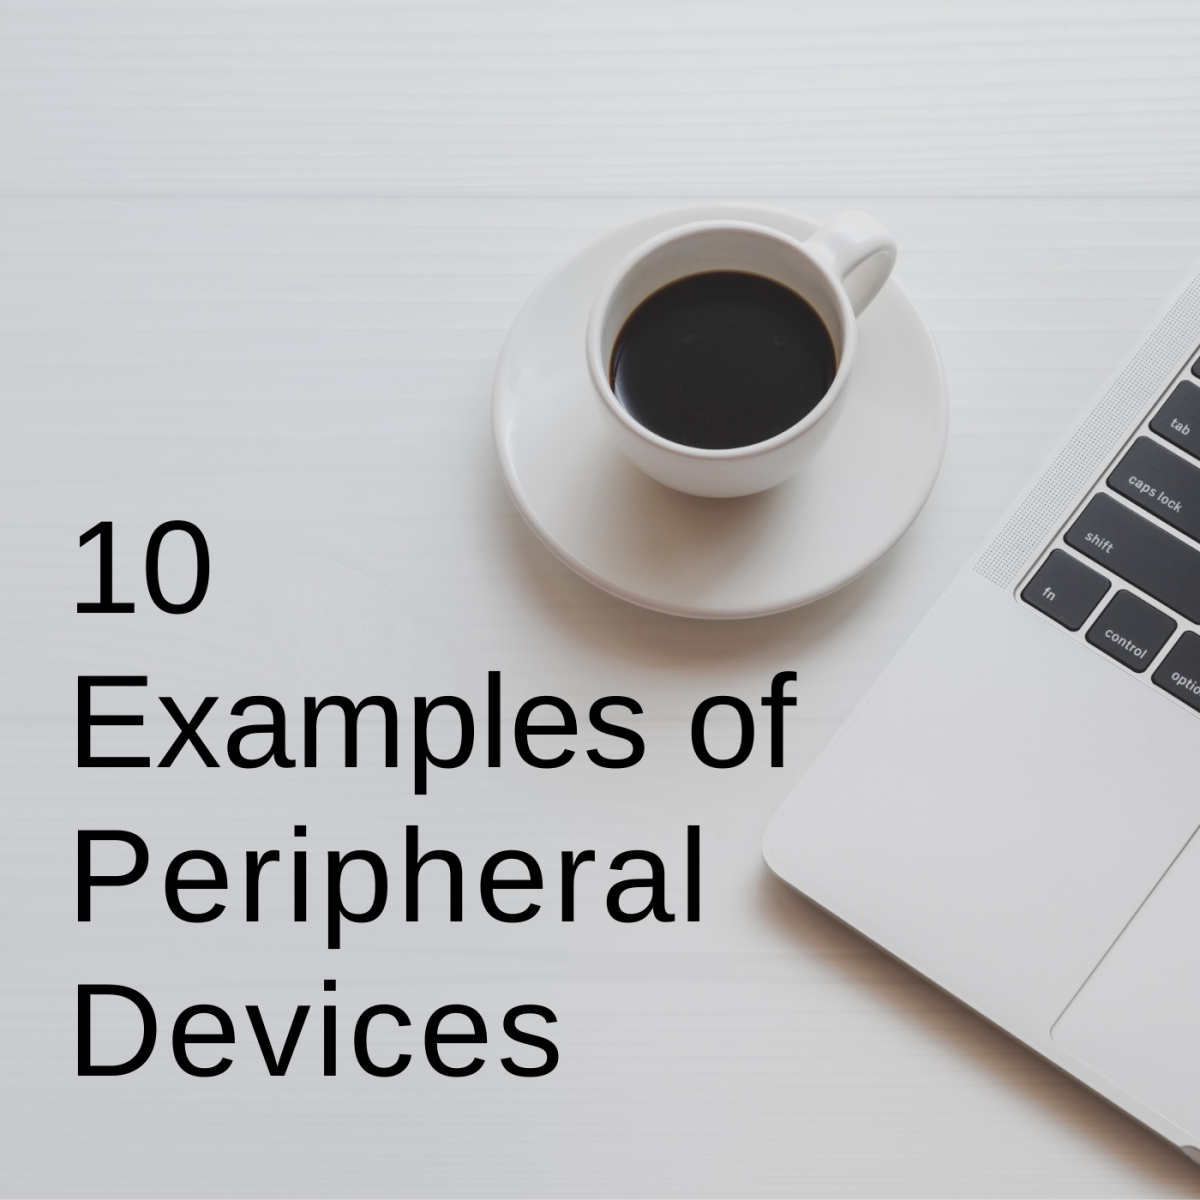 What Is a Peripheral Device? Definition and 10 Examples